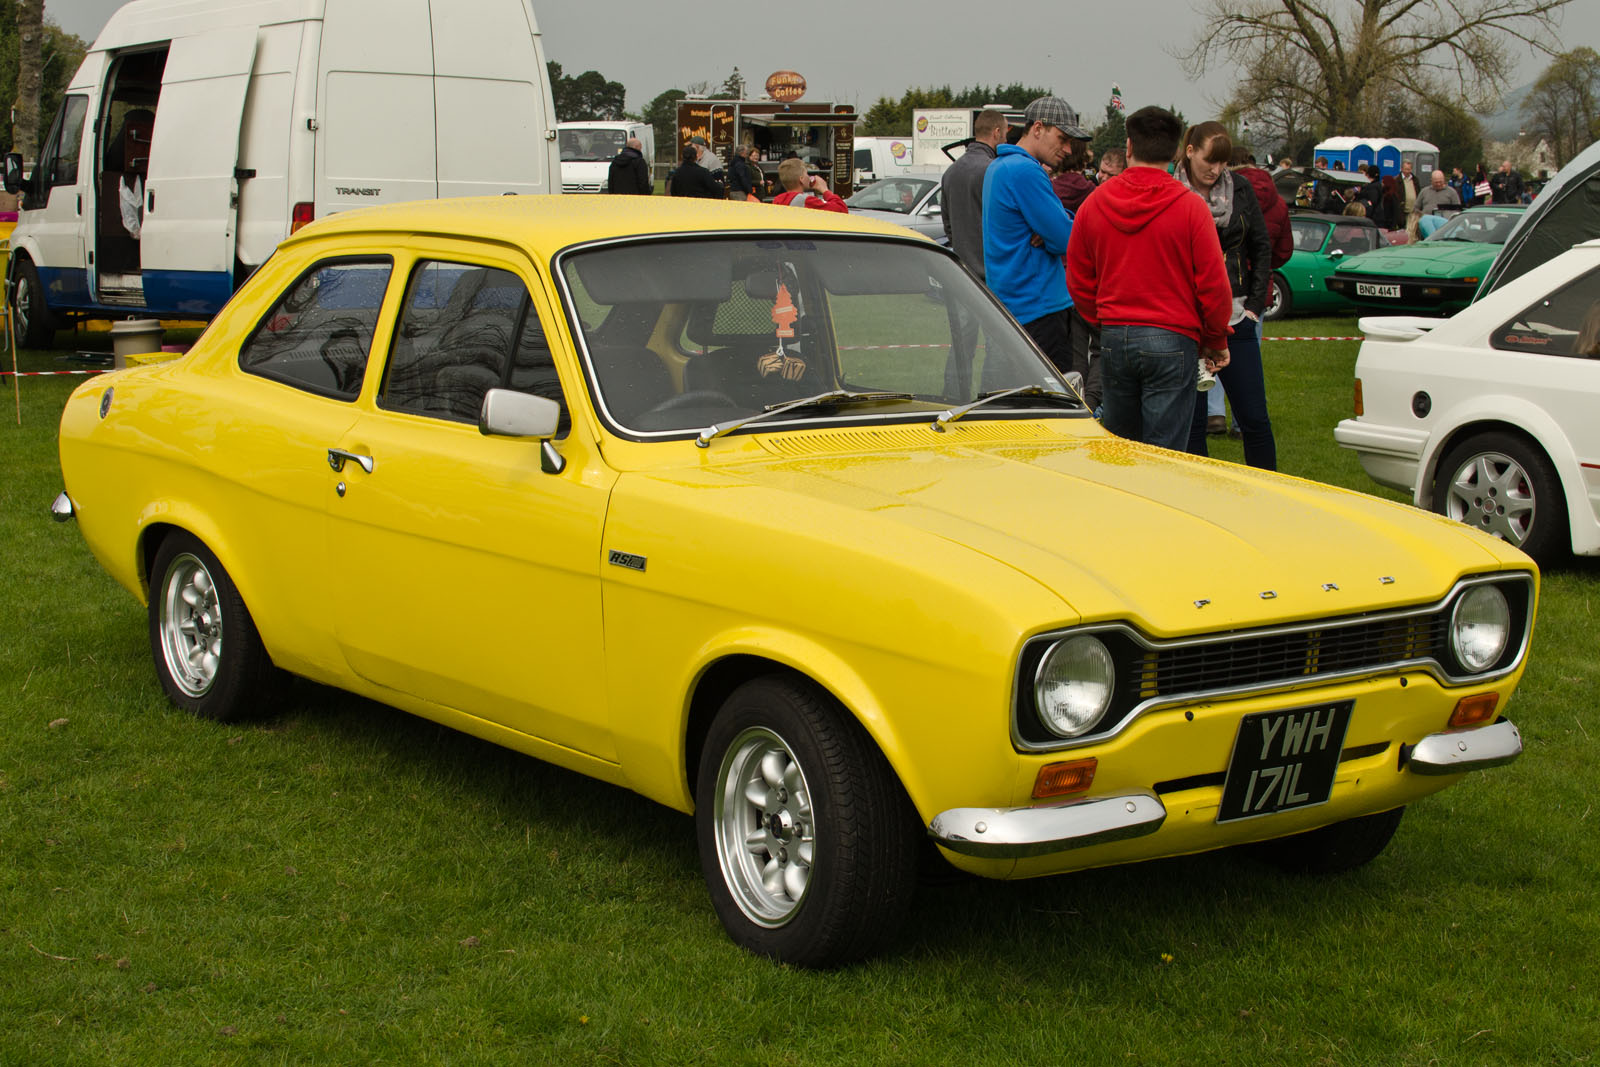 an old yellow car on some grass near other vehicles